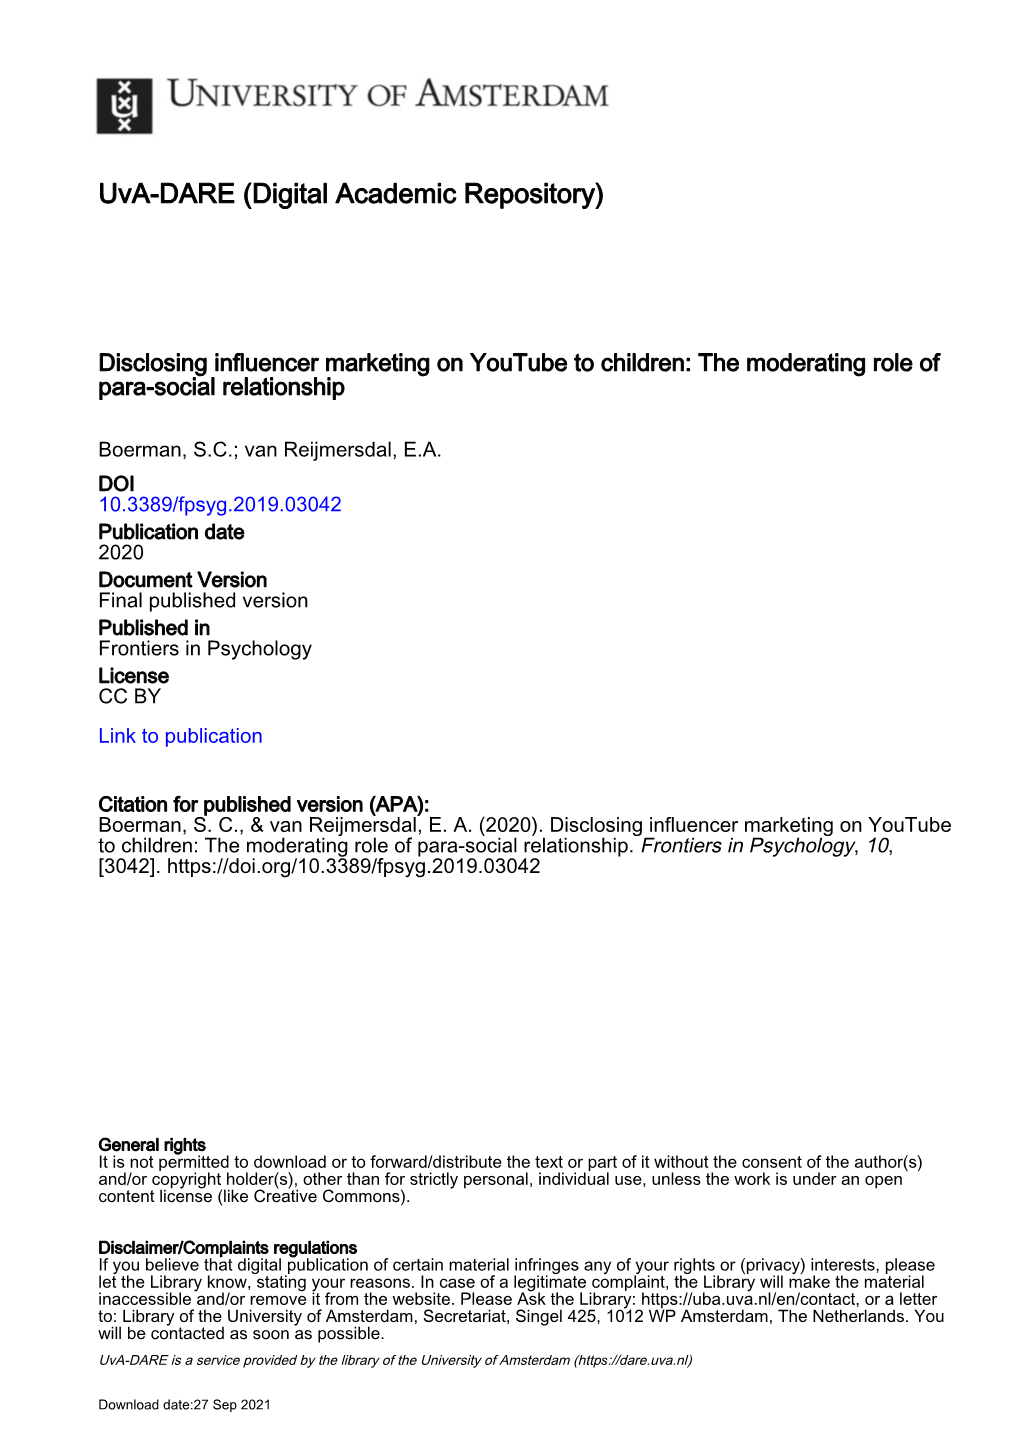 Disclosing Influencer Marketing on Youtube to Children: the Moderating Role of Para-Social Relationship